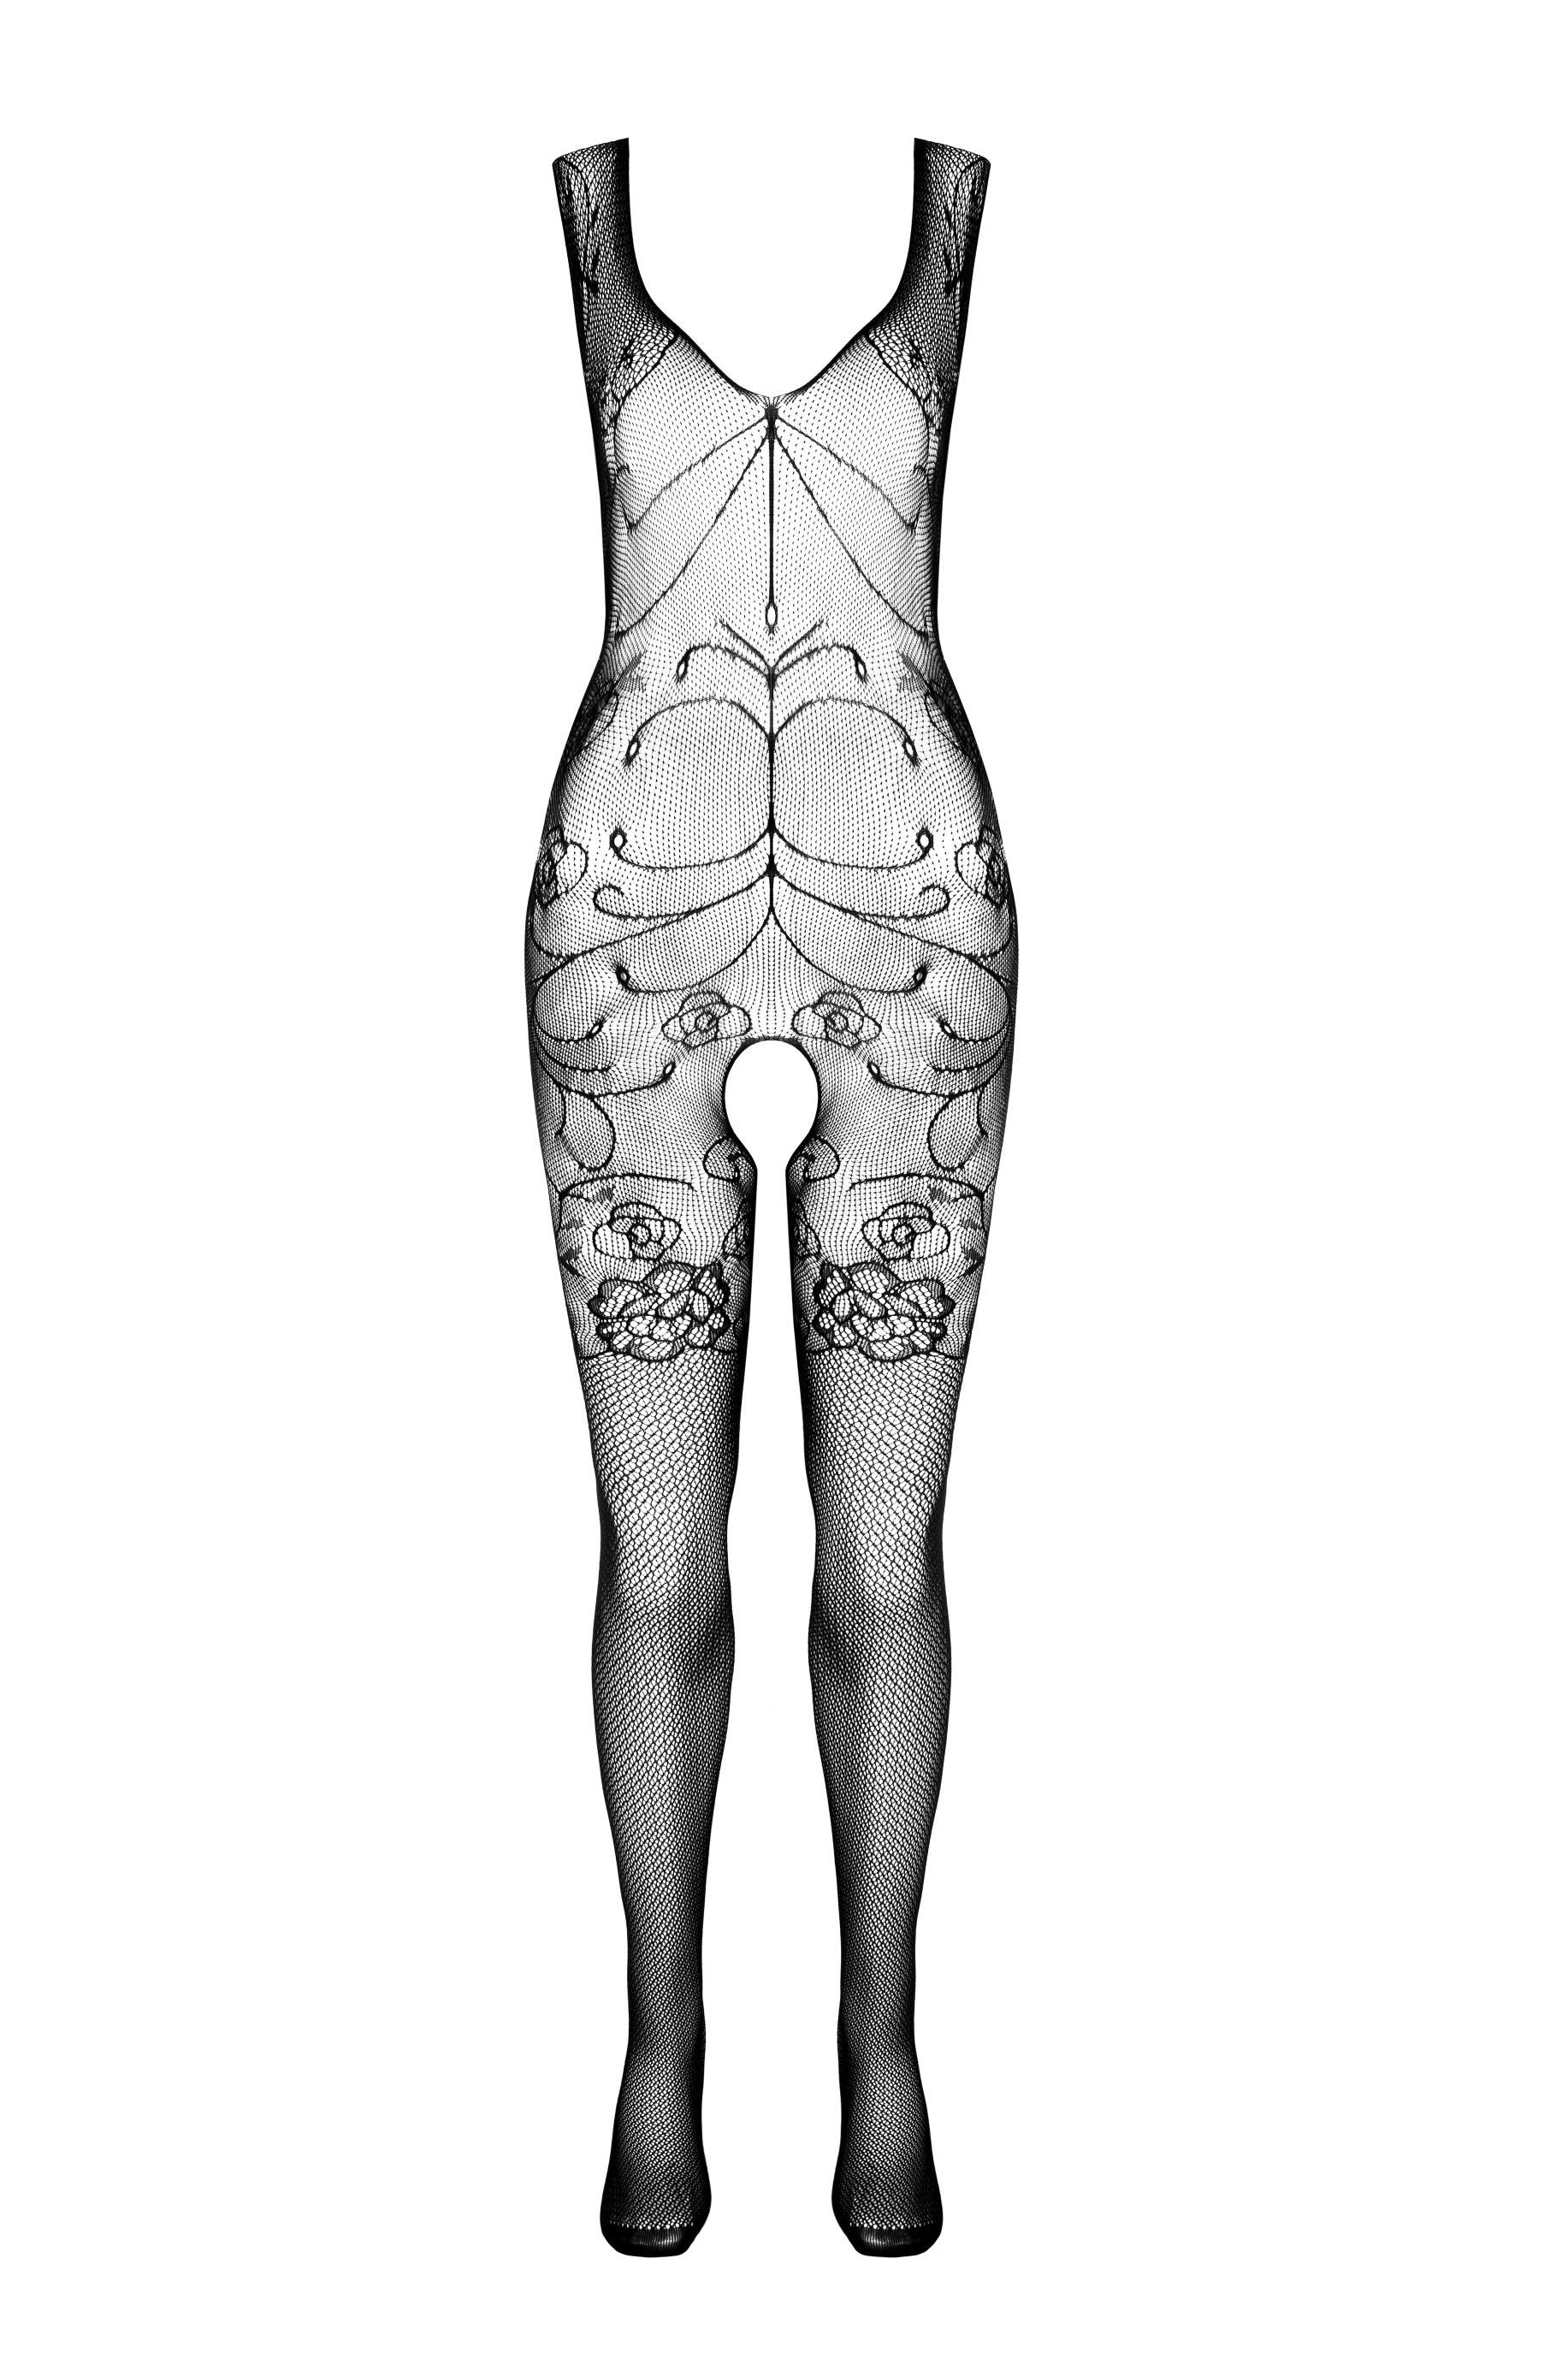 Passion schwarz transparent St) Bodystocking ouvert DEN Catsuit Eco Bodystocking (1 Passion Collection 20